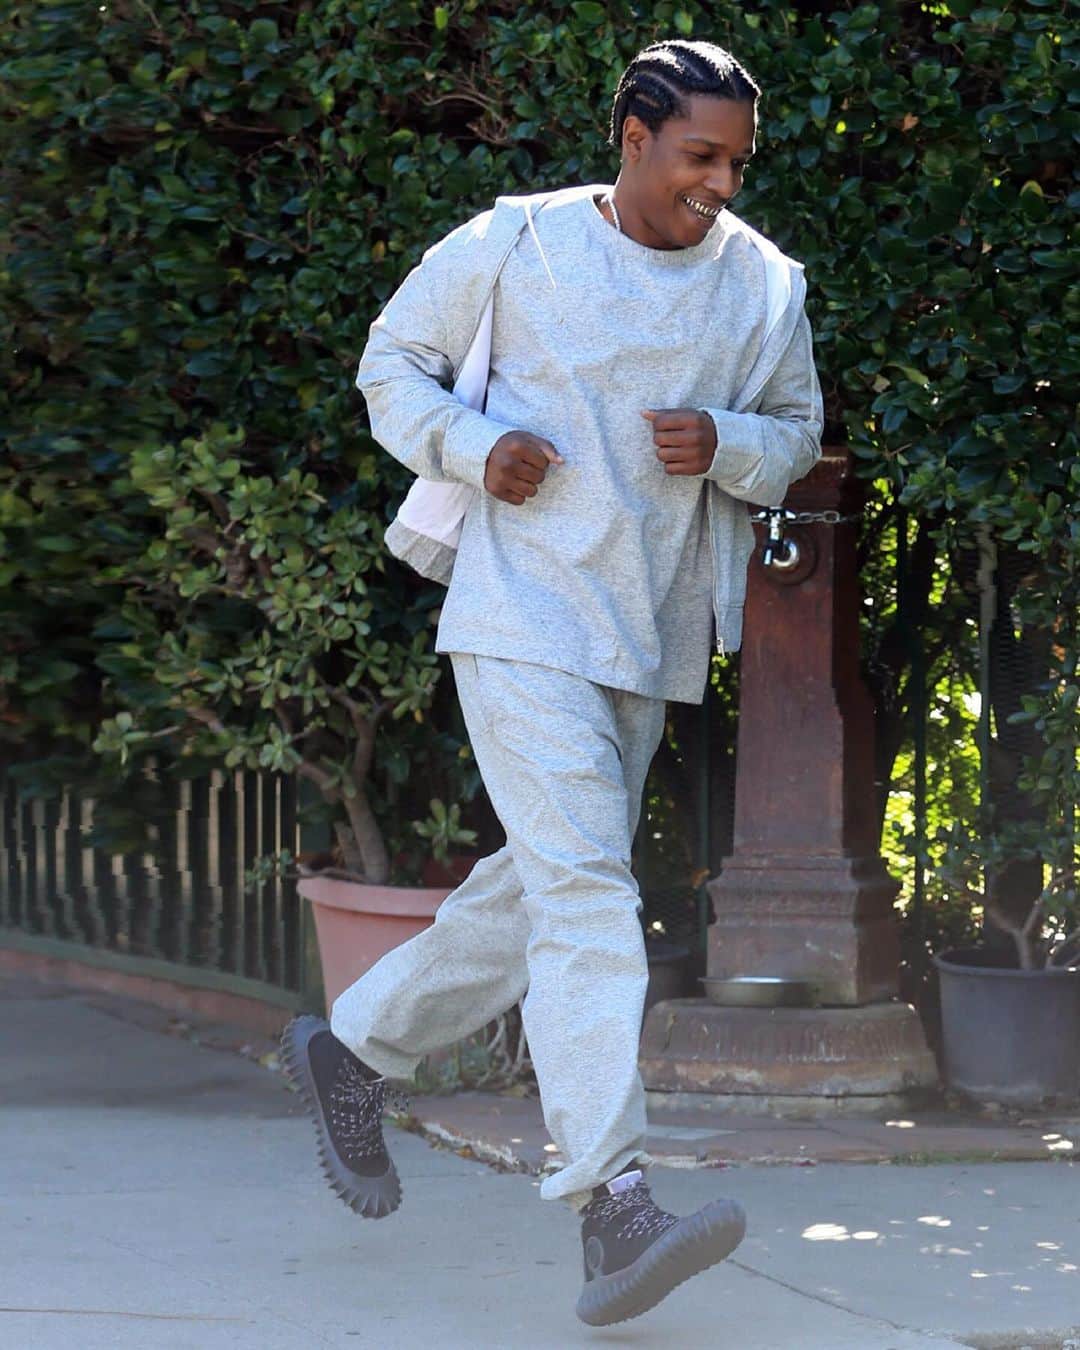 GQのインスタグラム：「@asaprocky went for a jog in a mysterious pair of as-yet unidentified sneakers. Are they an unreleased sneaker from the Harlem rapper’s upcoming Puma x F1 line? Or are they from… somewhere else? Read more at the link in bio.」